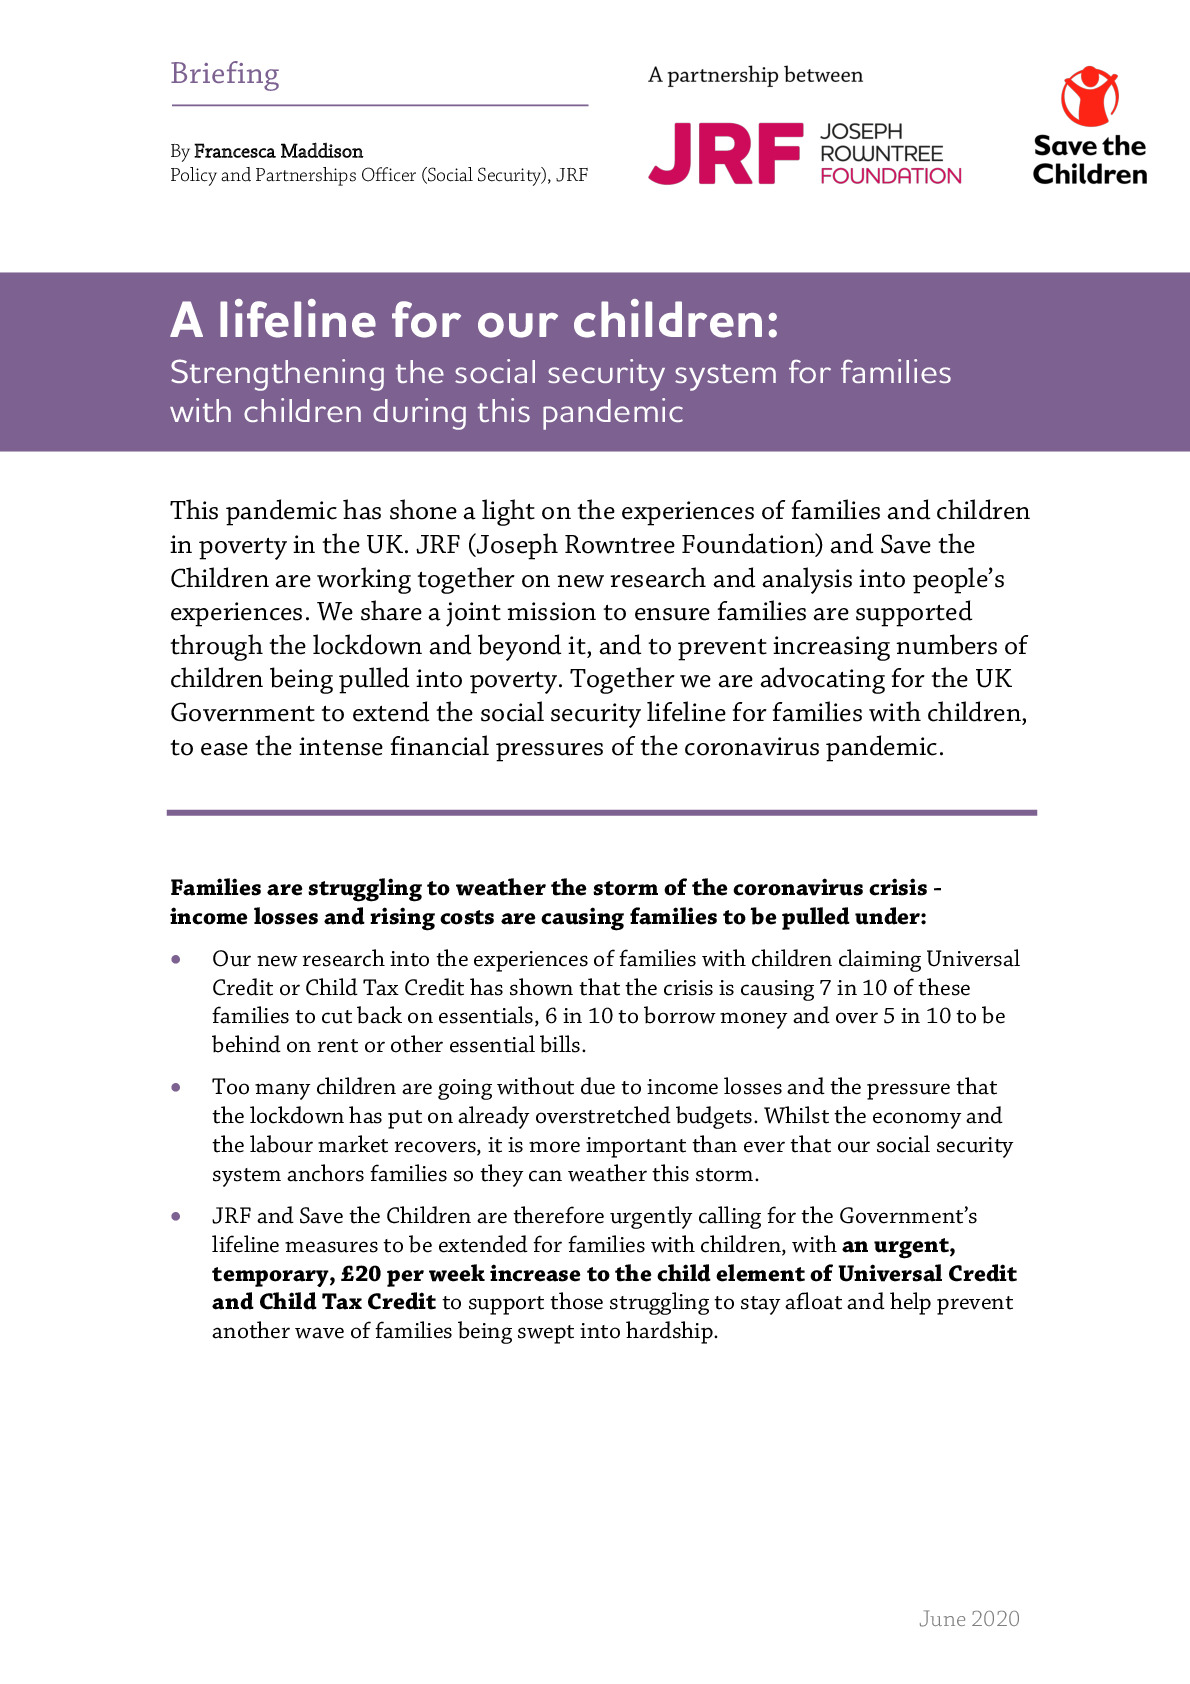 Save the Children and Joseph Rowntree Foundation Joint Briefing on Lifeline for Children